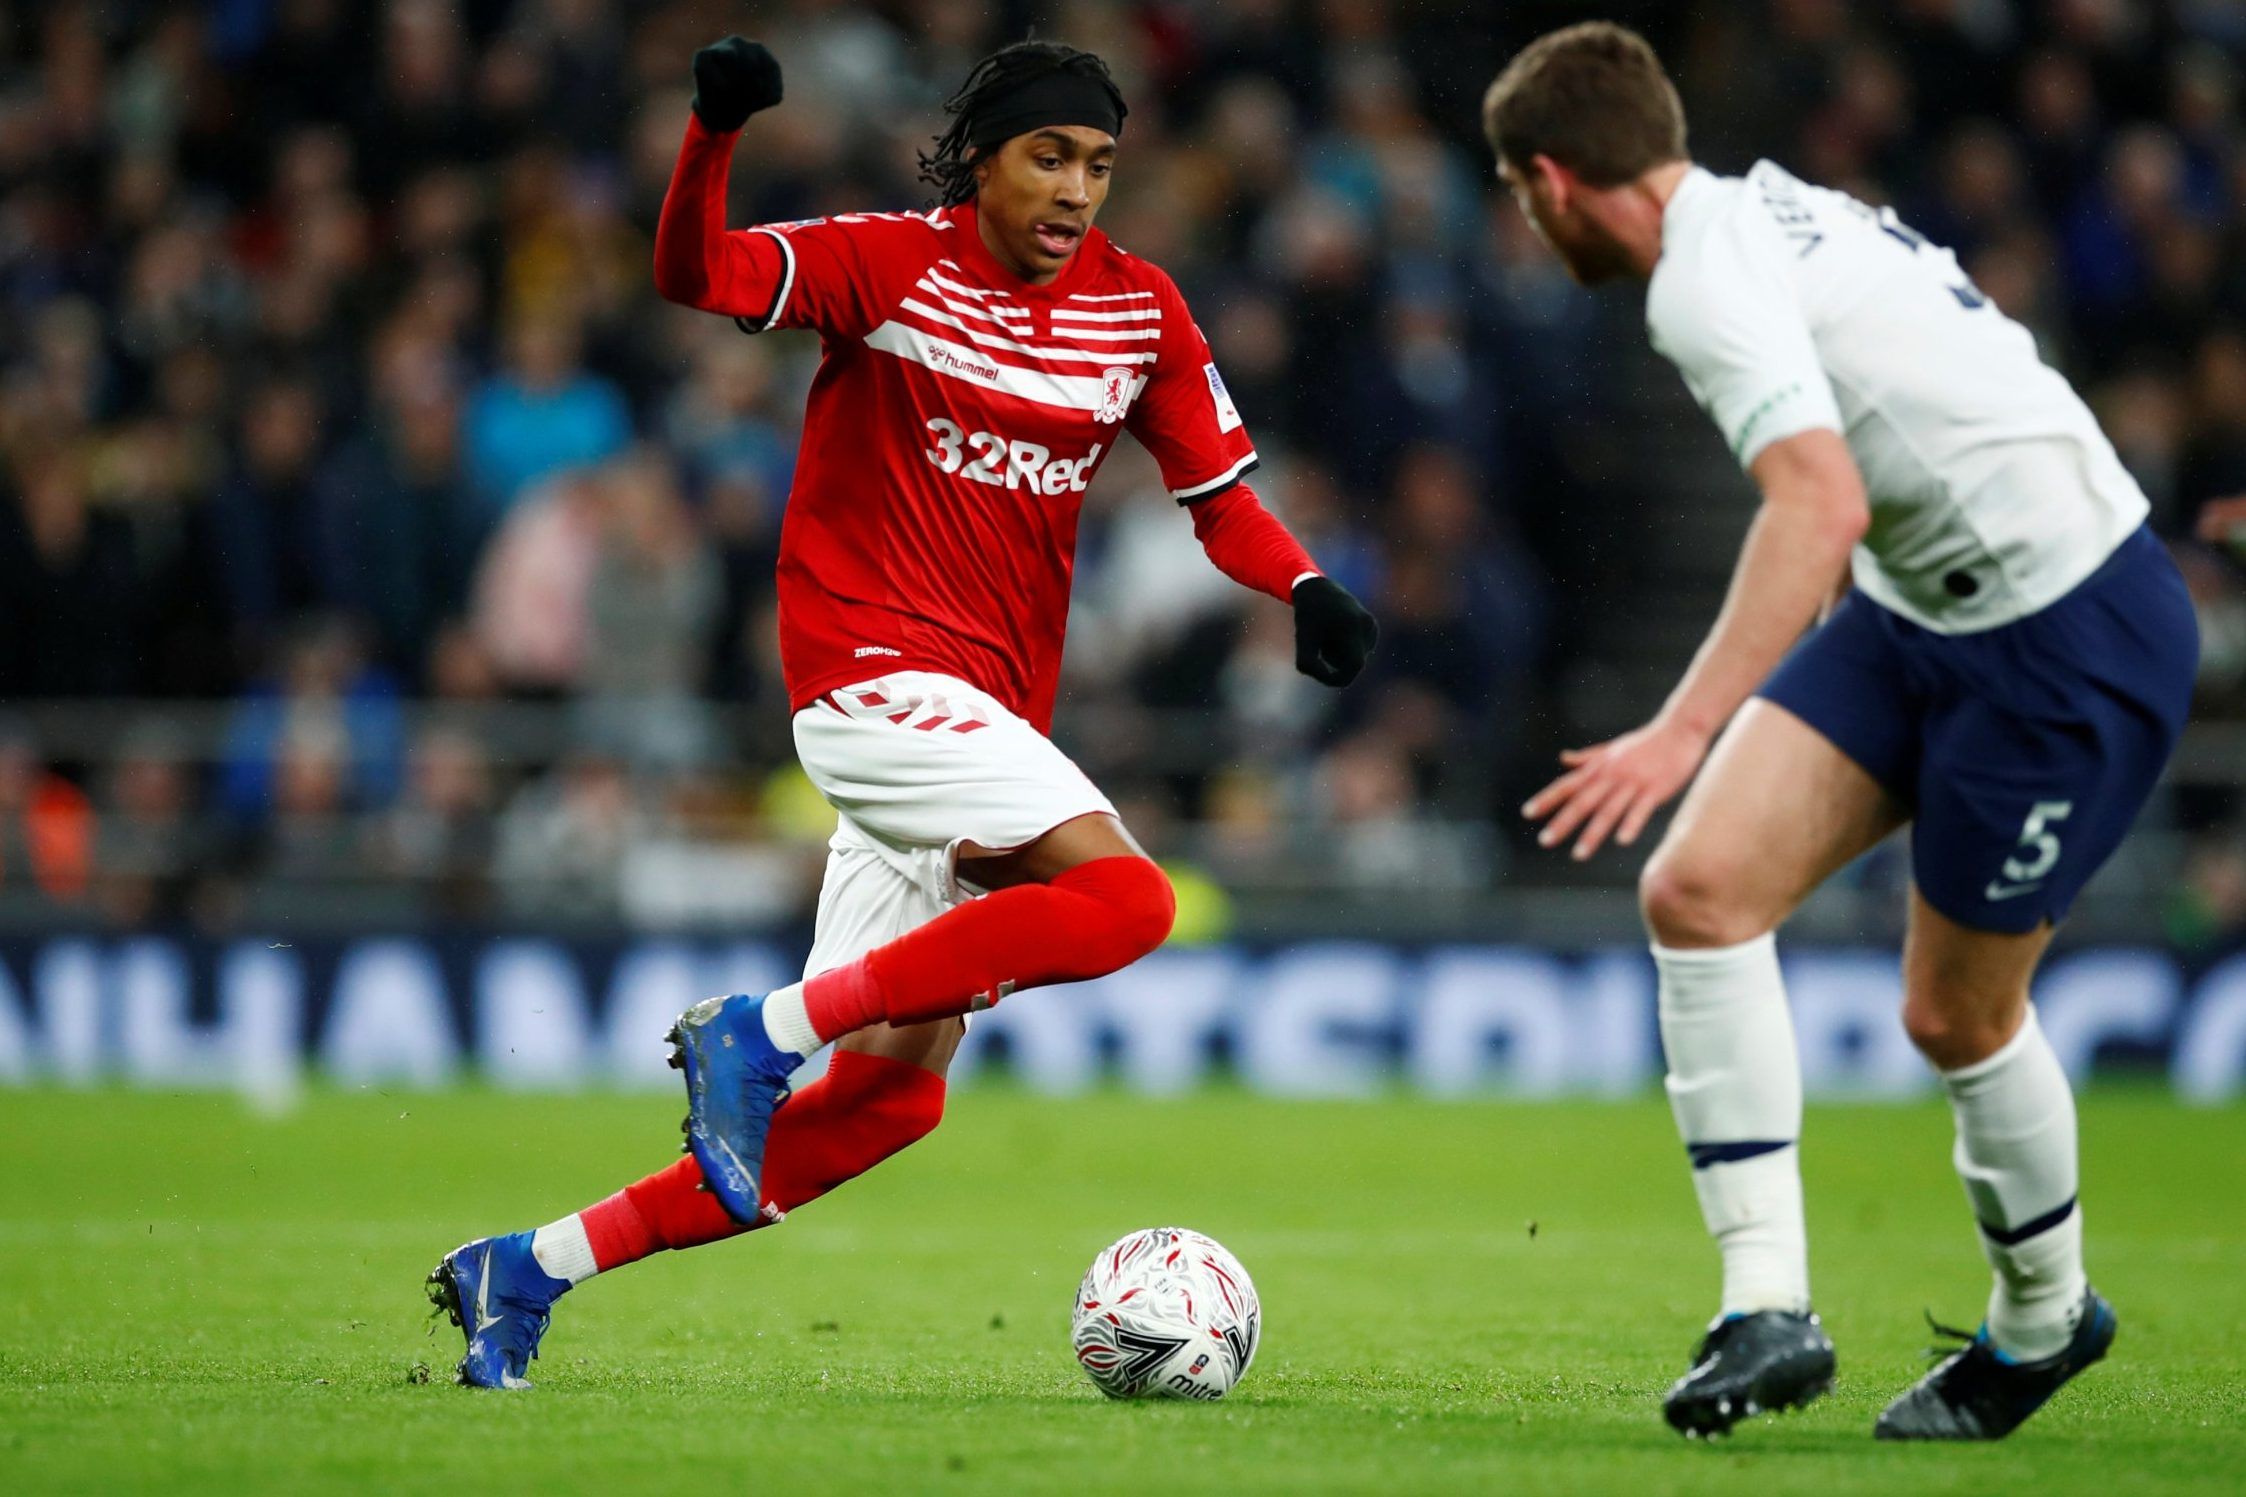 Middlesbrough defender Djed Spence in action against Spurs in the FA Cup